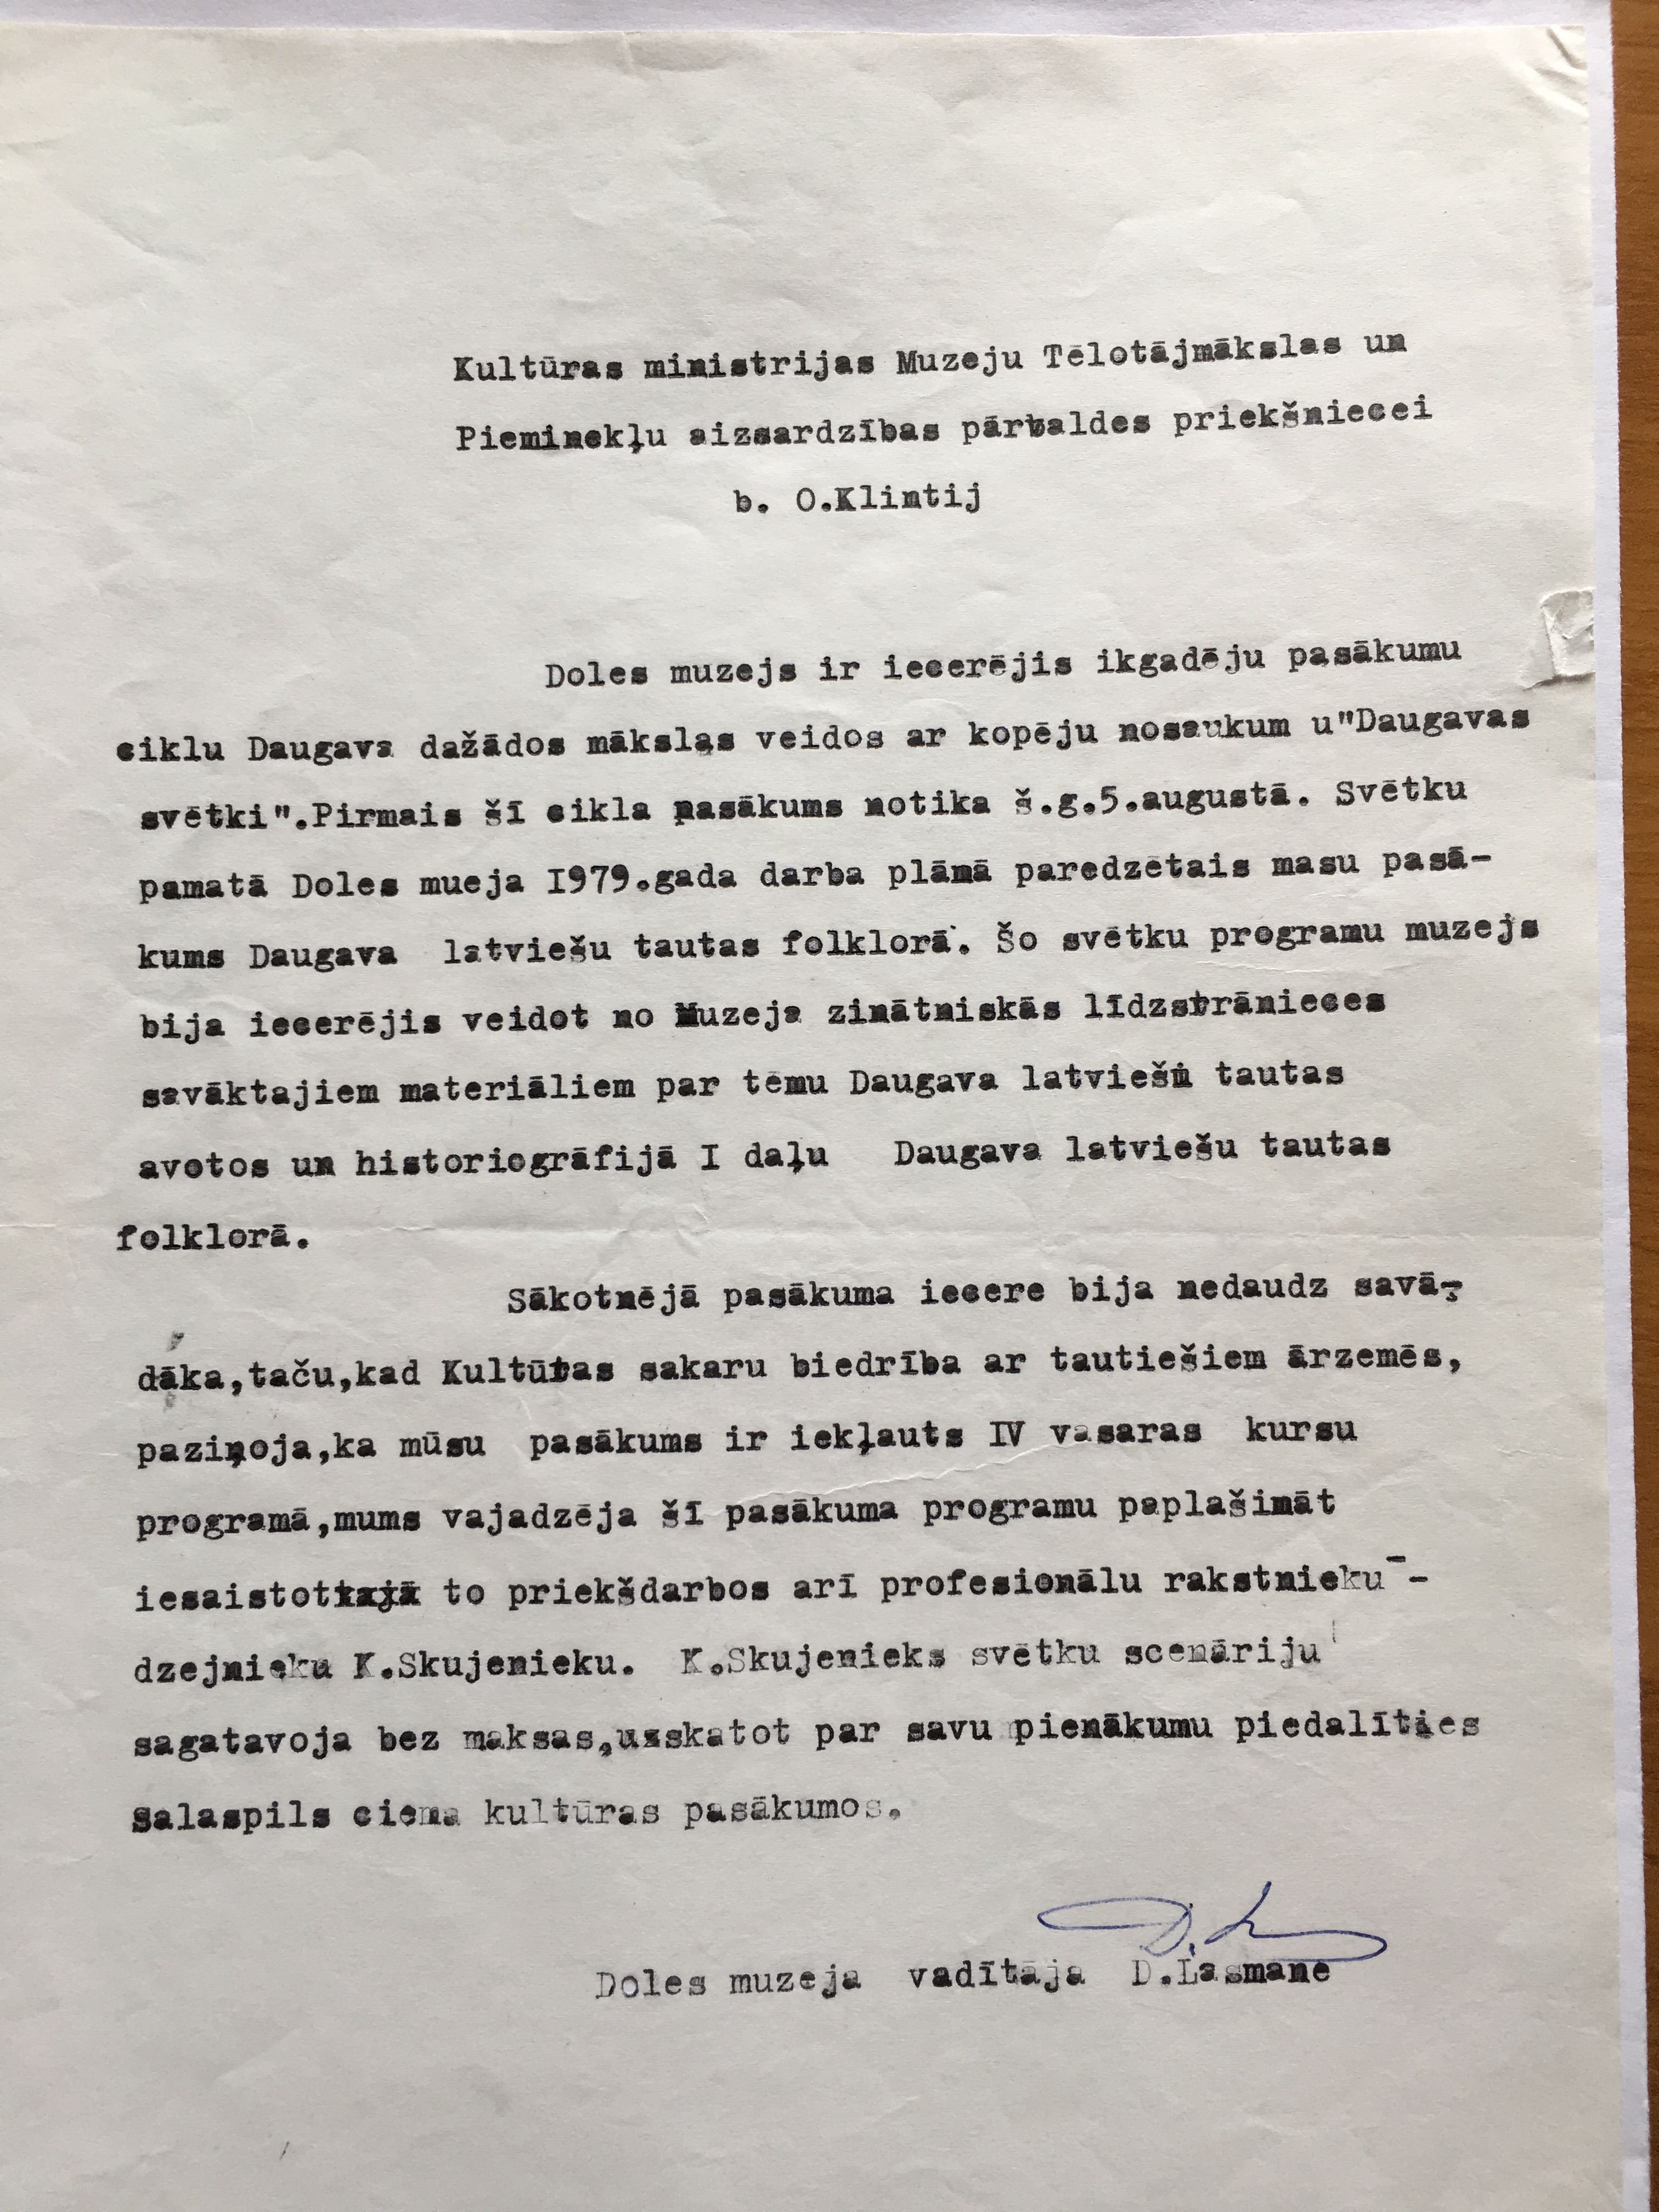 Explanation letter of director of the Dole History Museum Daina Lasmane to the official of the Latvian SSR Ministry of Culture about the First River Daugava Festivity in 1979